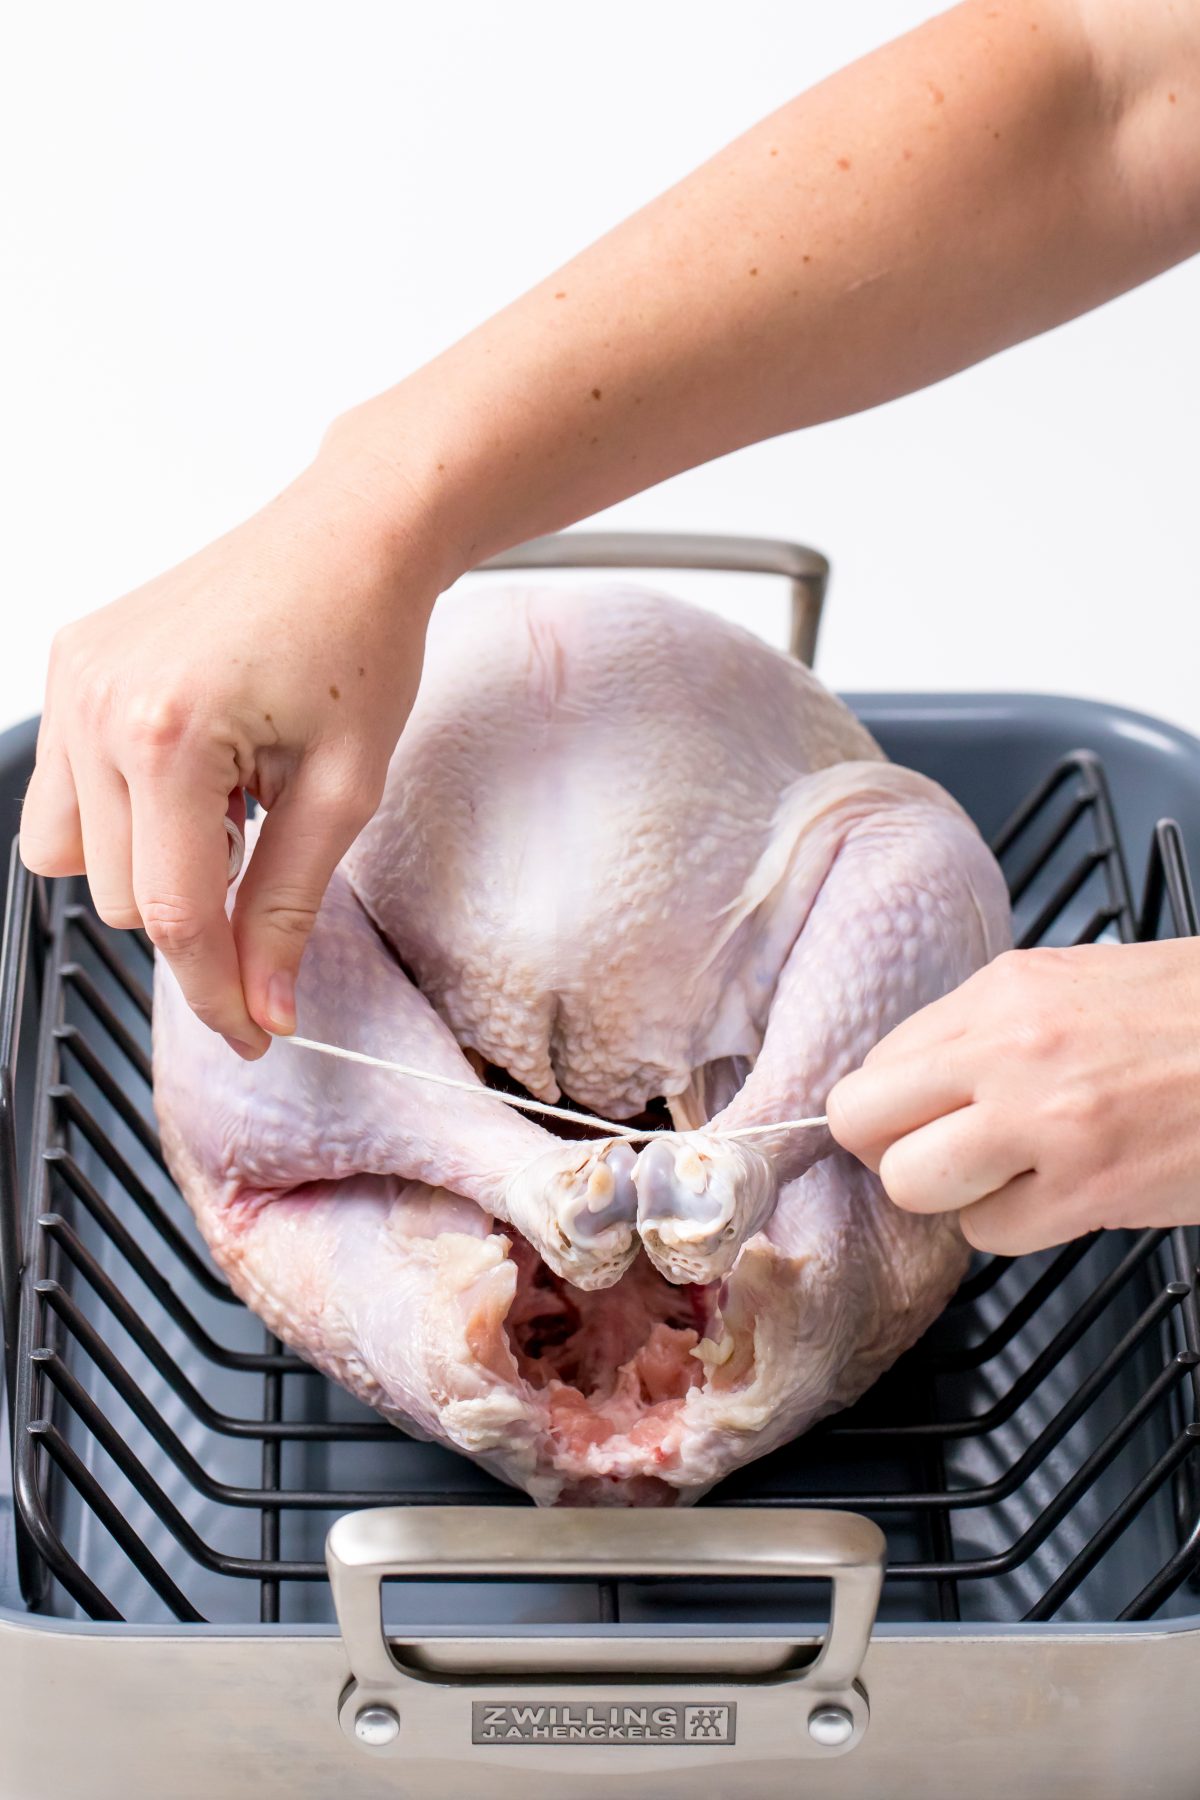 Place the turkey in a roasting pan